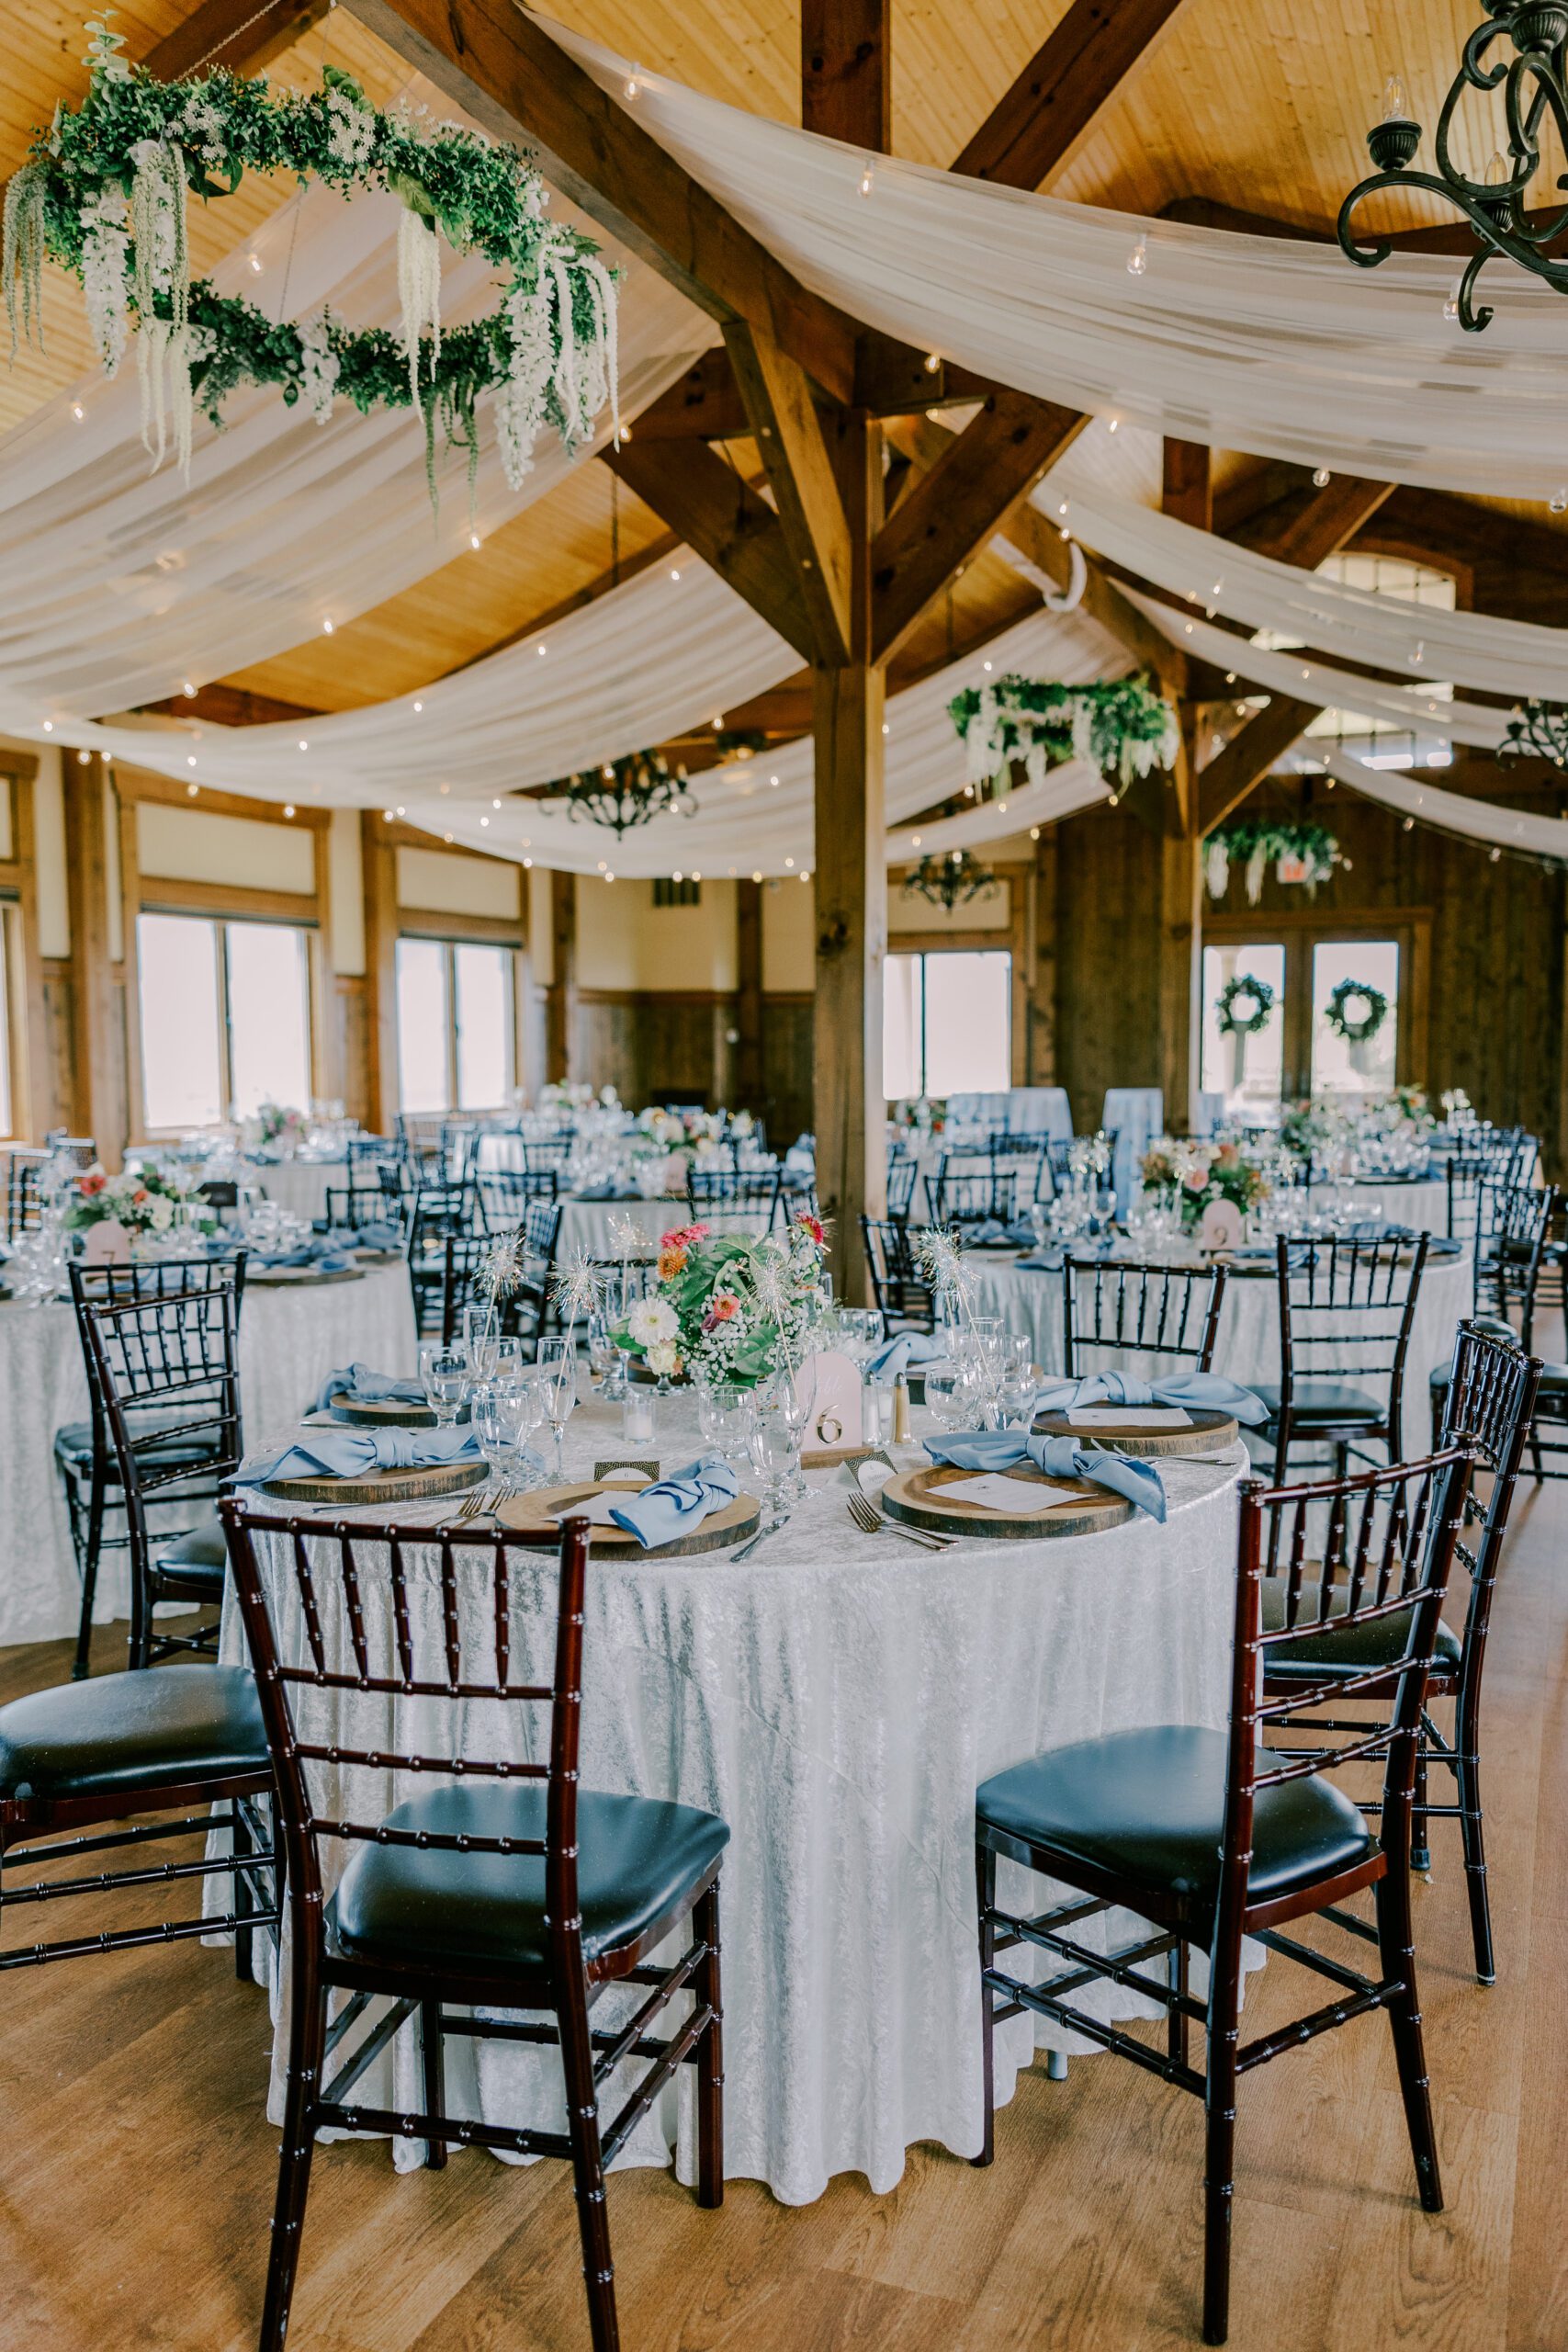 Tables set up in the reception space at irvine estate, white material is draped from the ceiling and circles of greenery and floral chandaliers